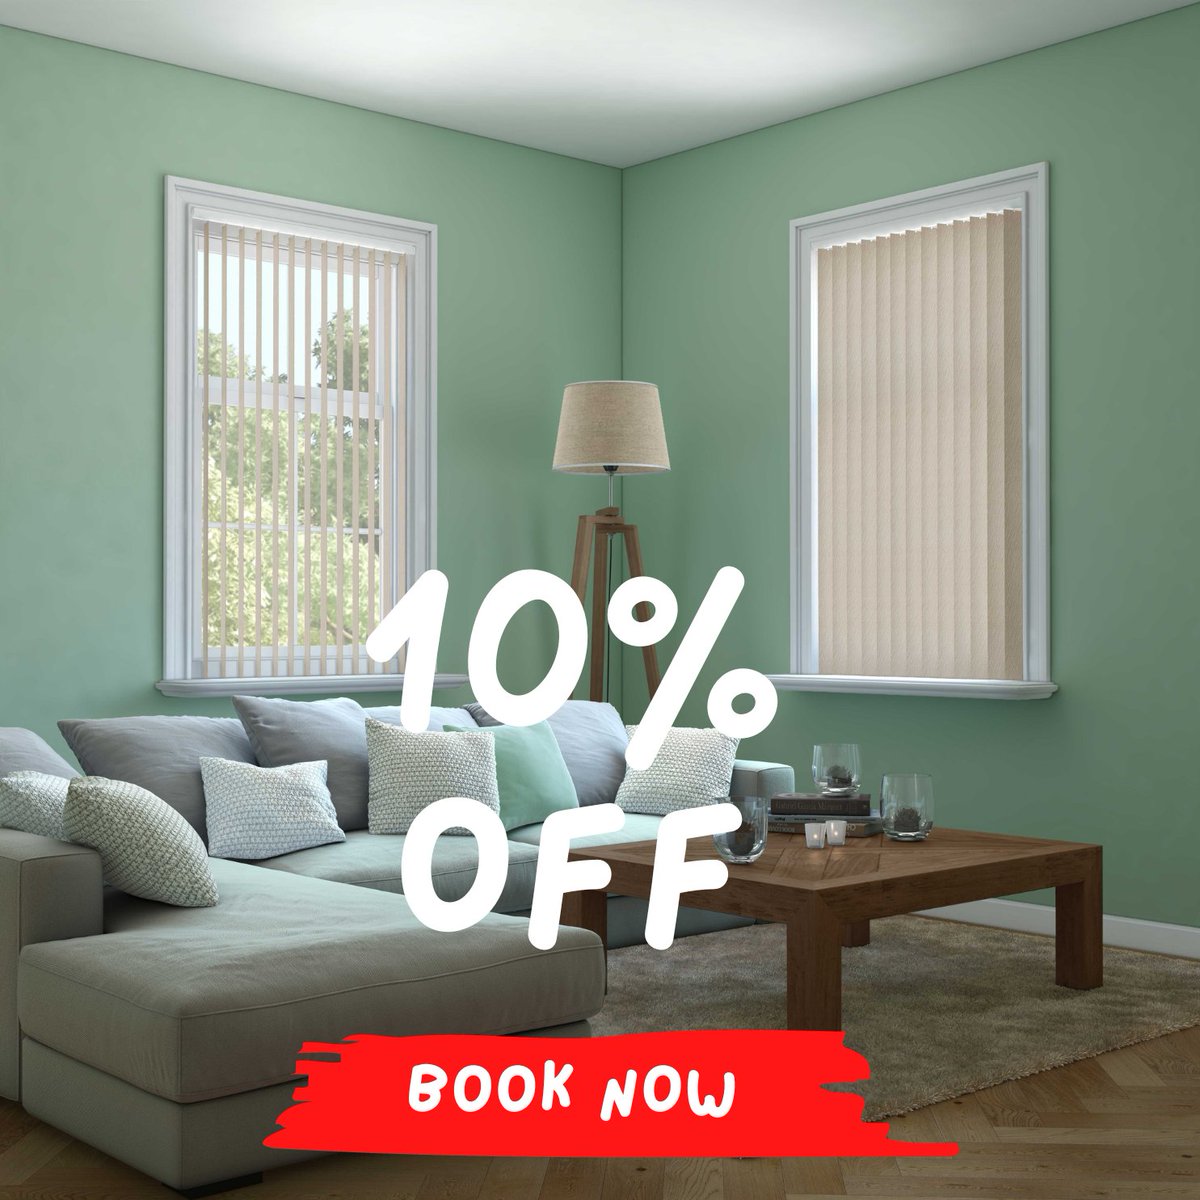 To celebrate the May Bank Holidays we have got 10% off our vertical, faux wood and roller blinds. Hurry! Offer ends on 31st May. Call us on 01604 646007 to book a free home measure and quote. gilliansblinds.com #Blinds #Sale #Northampton #MiltonKeynes